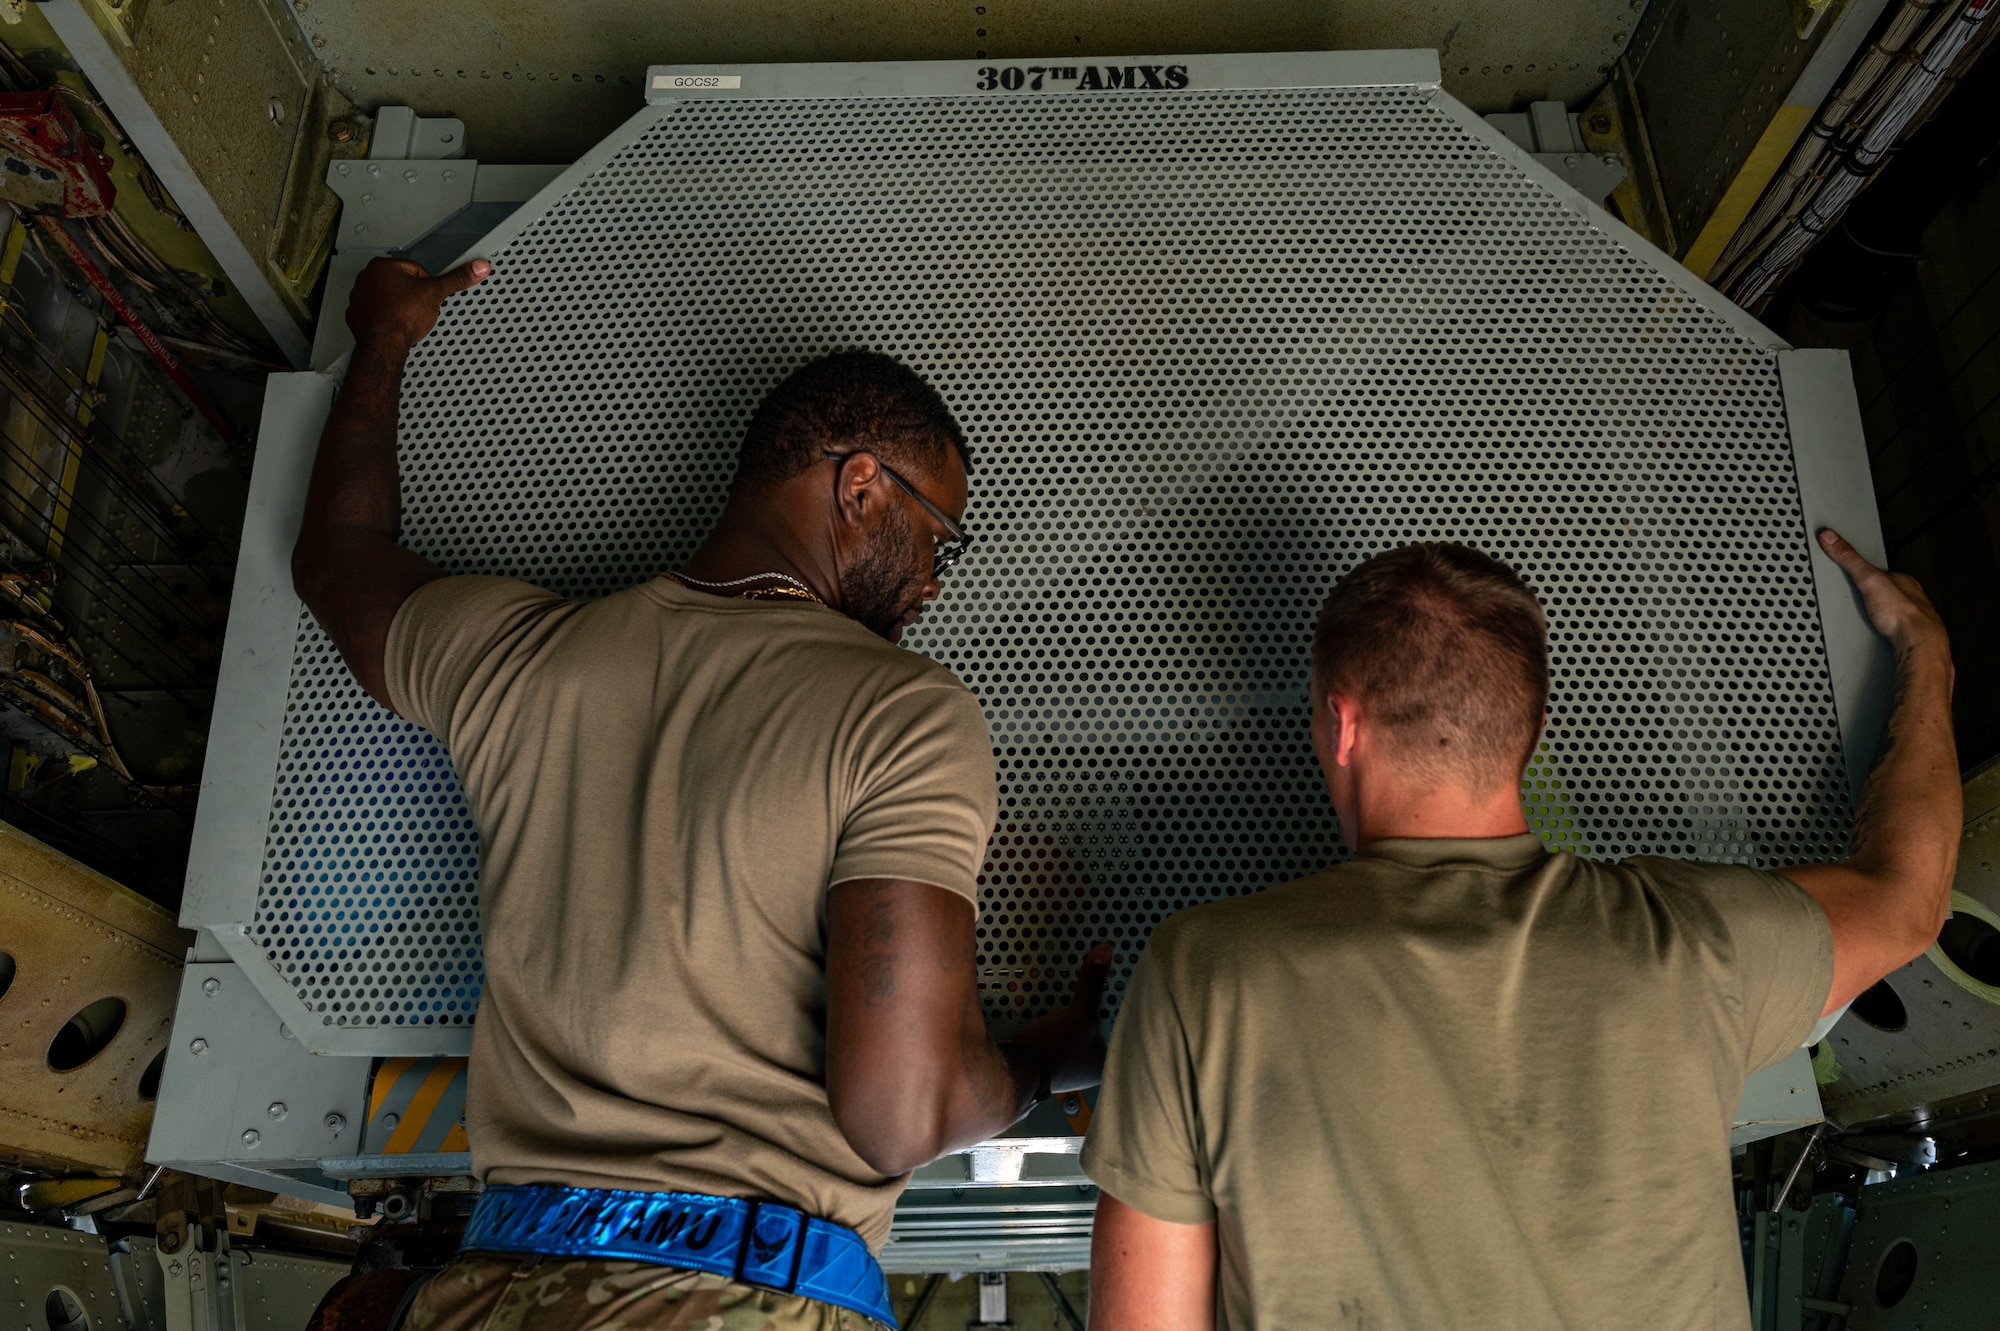 Master Sgt. Anthony Williams Jr., left, 2nd Aircraft Maintenance Squadron production supervisor, and Senior Airman Aaron Wiles, right, 2nd Aircraft Maintenance Squadron engine mechanic, remove the outer wall of an On-board Cargo System inside a B-52H Stratofortress during an Agile Combat Employment exercise at Fairchild Air Force Base, Washington, Aug. 18, 2022. Each B-52 can house two BOCSs each loaded with up to 5,000 lbs of maintenance and support equipment. (U.S. Air Force photo by Senior Airman Chase Sullivan)